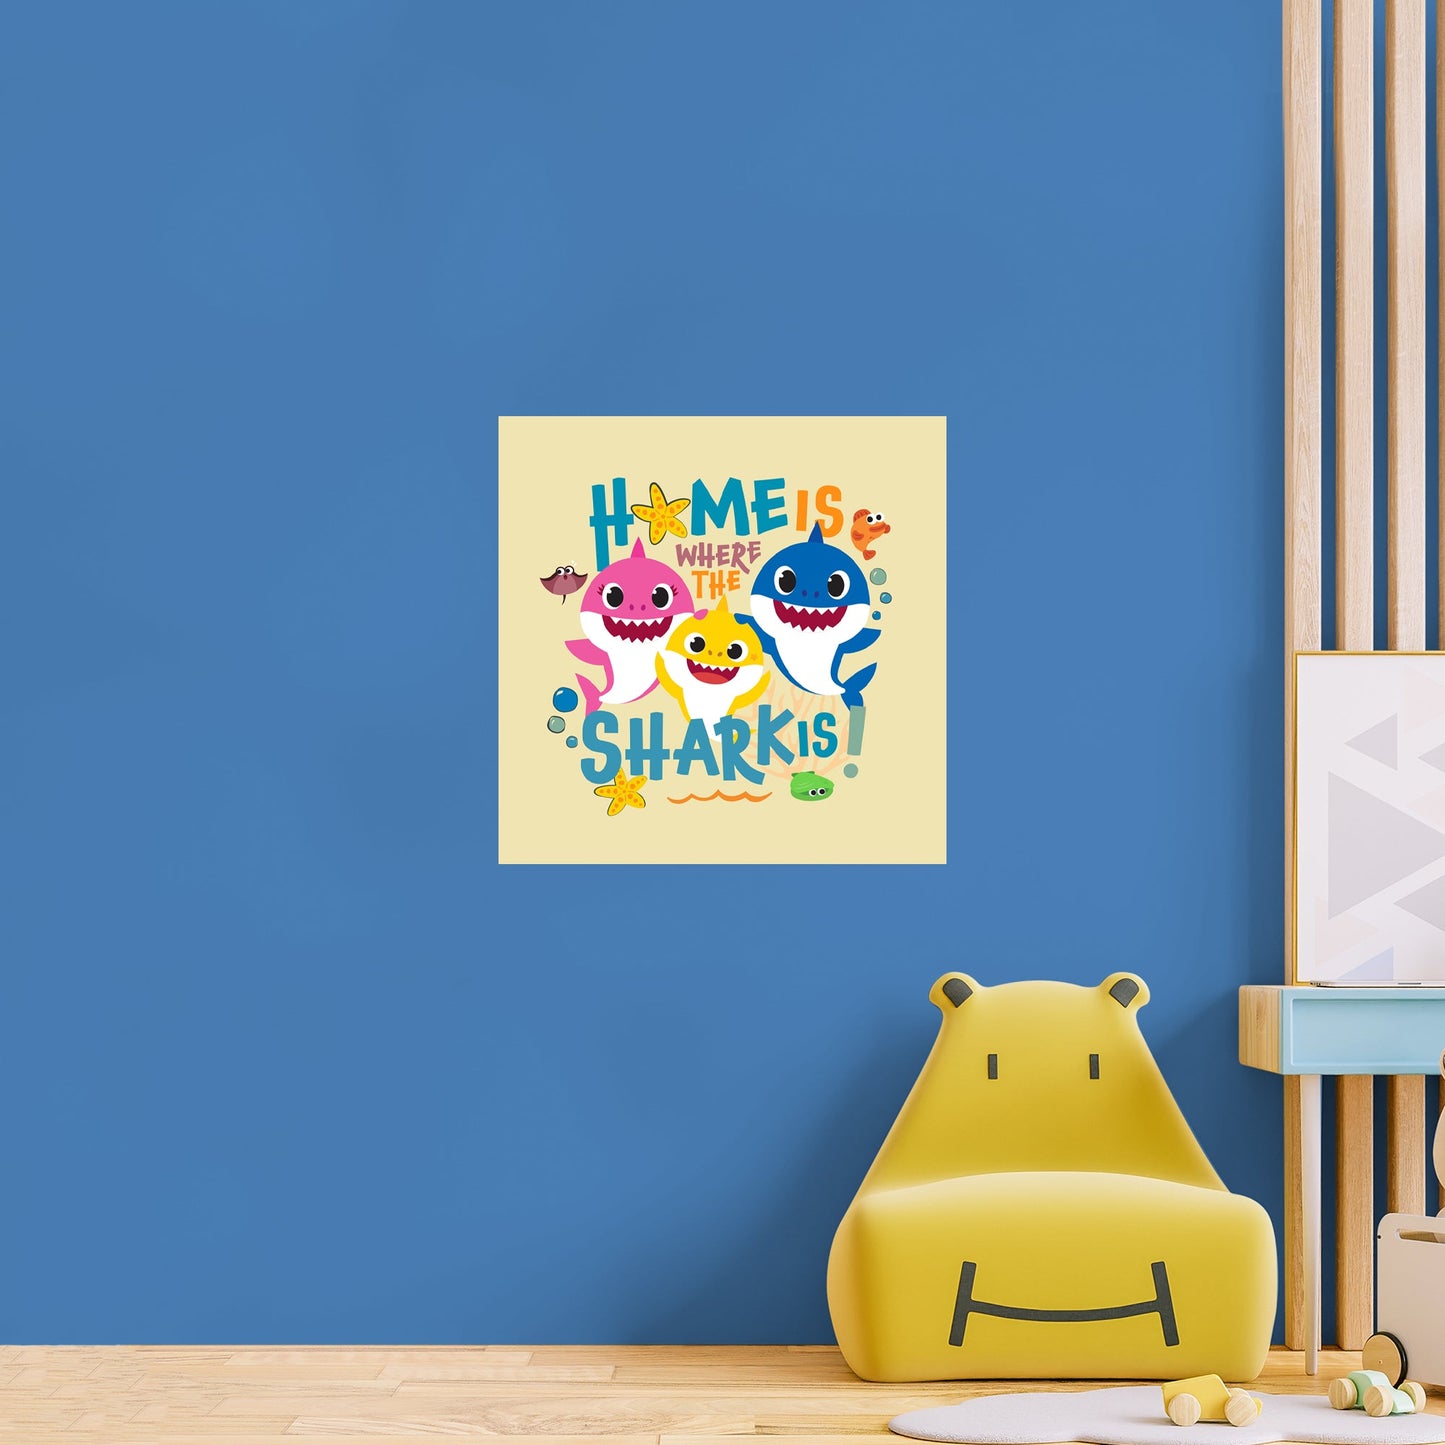 Baby Shark: Home Poster - Officially Licensed Nickelodeon Removable Adhesive Decal